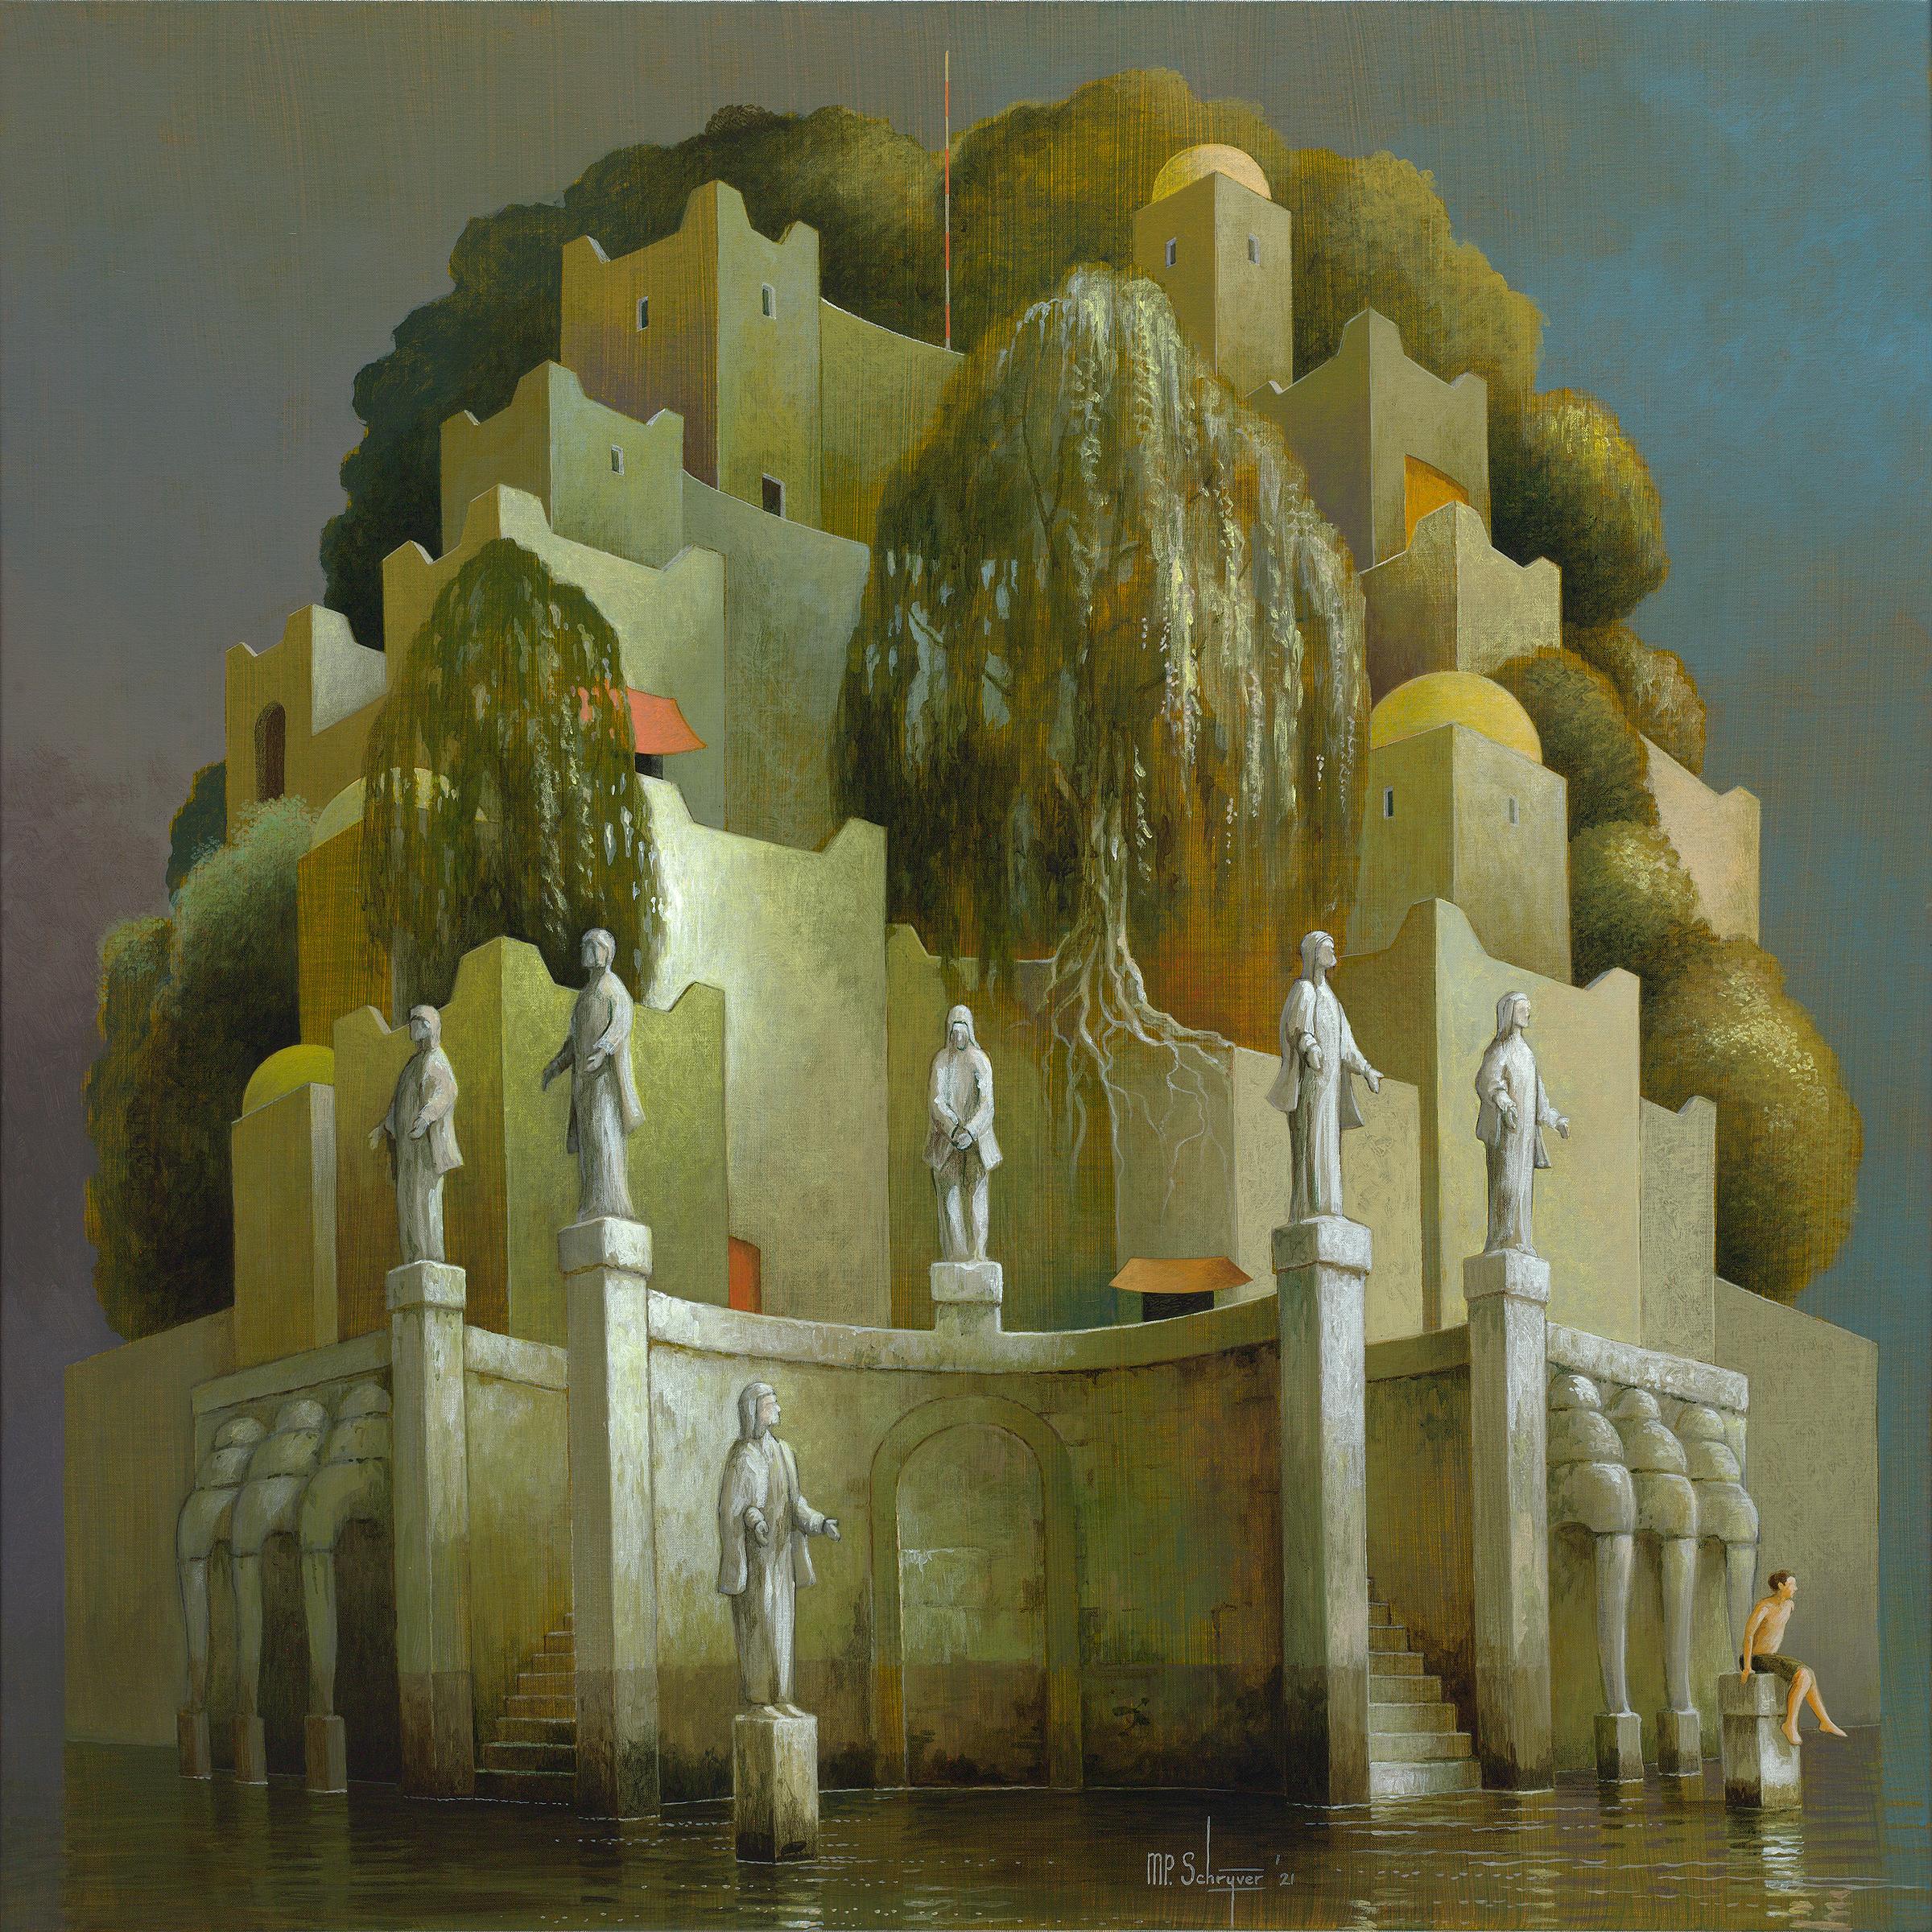 Michiel Schrijver Landscape Painting - New Insights- 21st Century Contemporary Narrative Imaginary Painting 